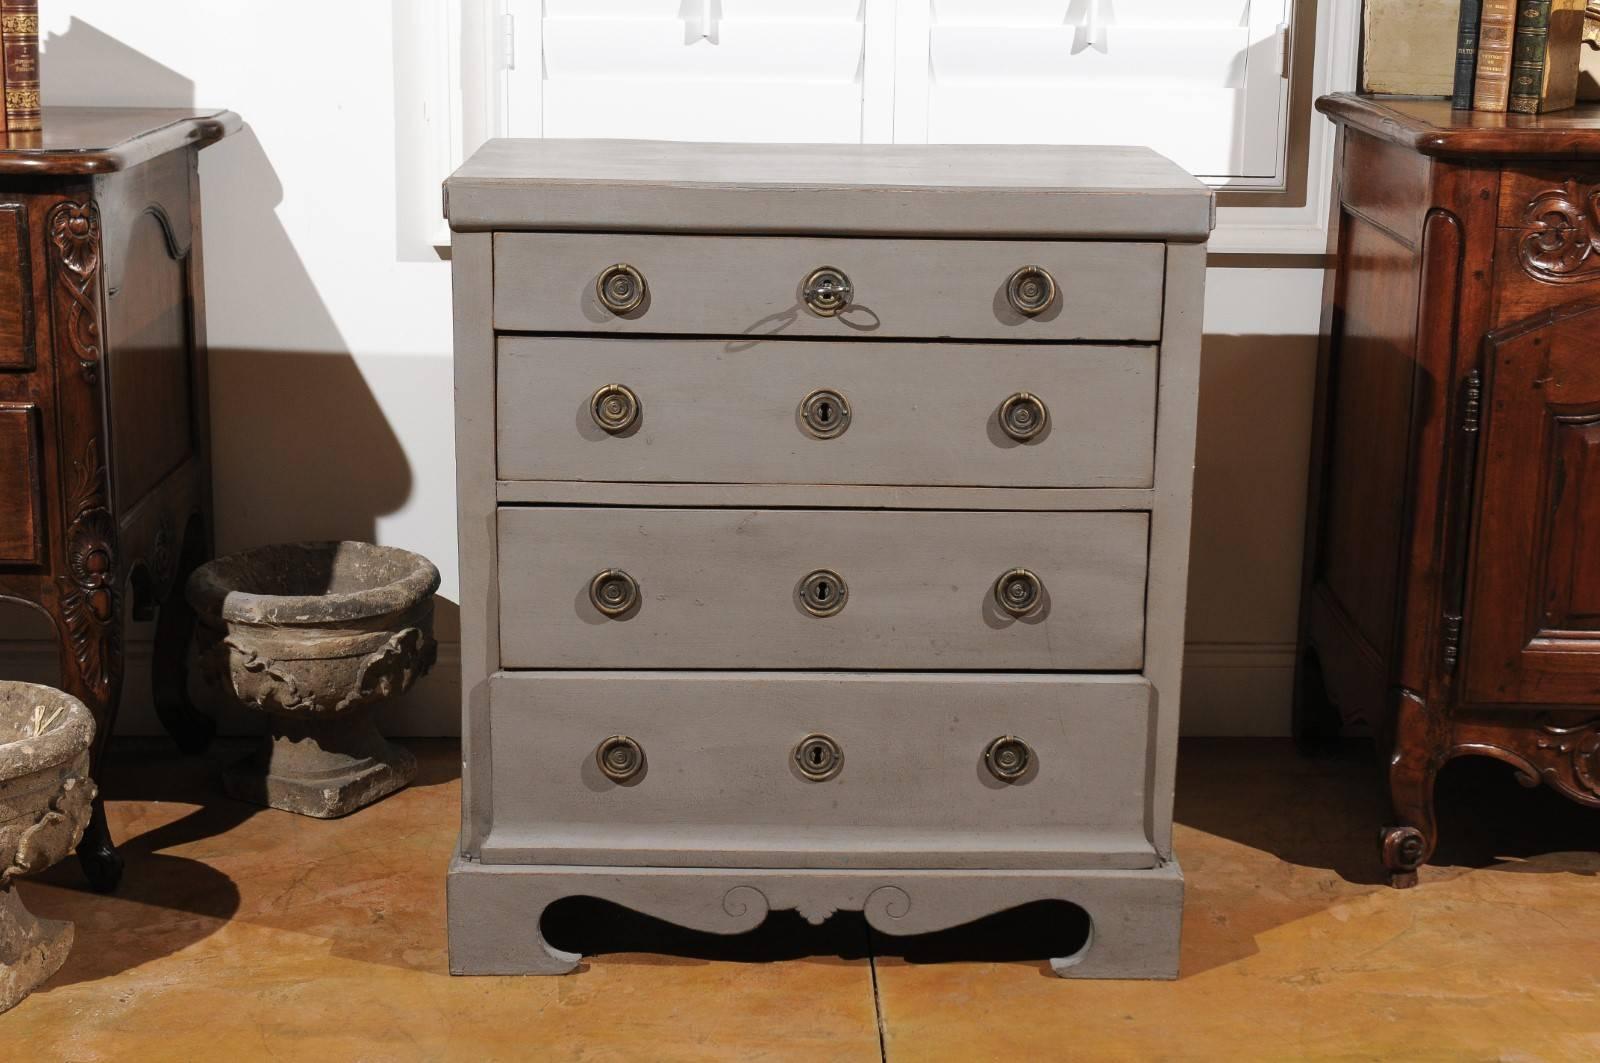 A Swedish Karl Johan period painted wood four-drawer commode from the first half of the 19th century, with bracket feet and voluted skirt. This Swedish painted commode features a rectangular, slightly raised top, sitting above four graduated